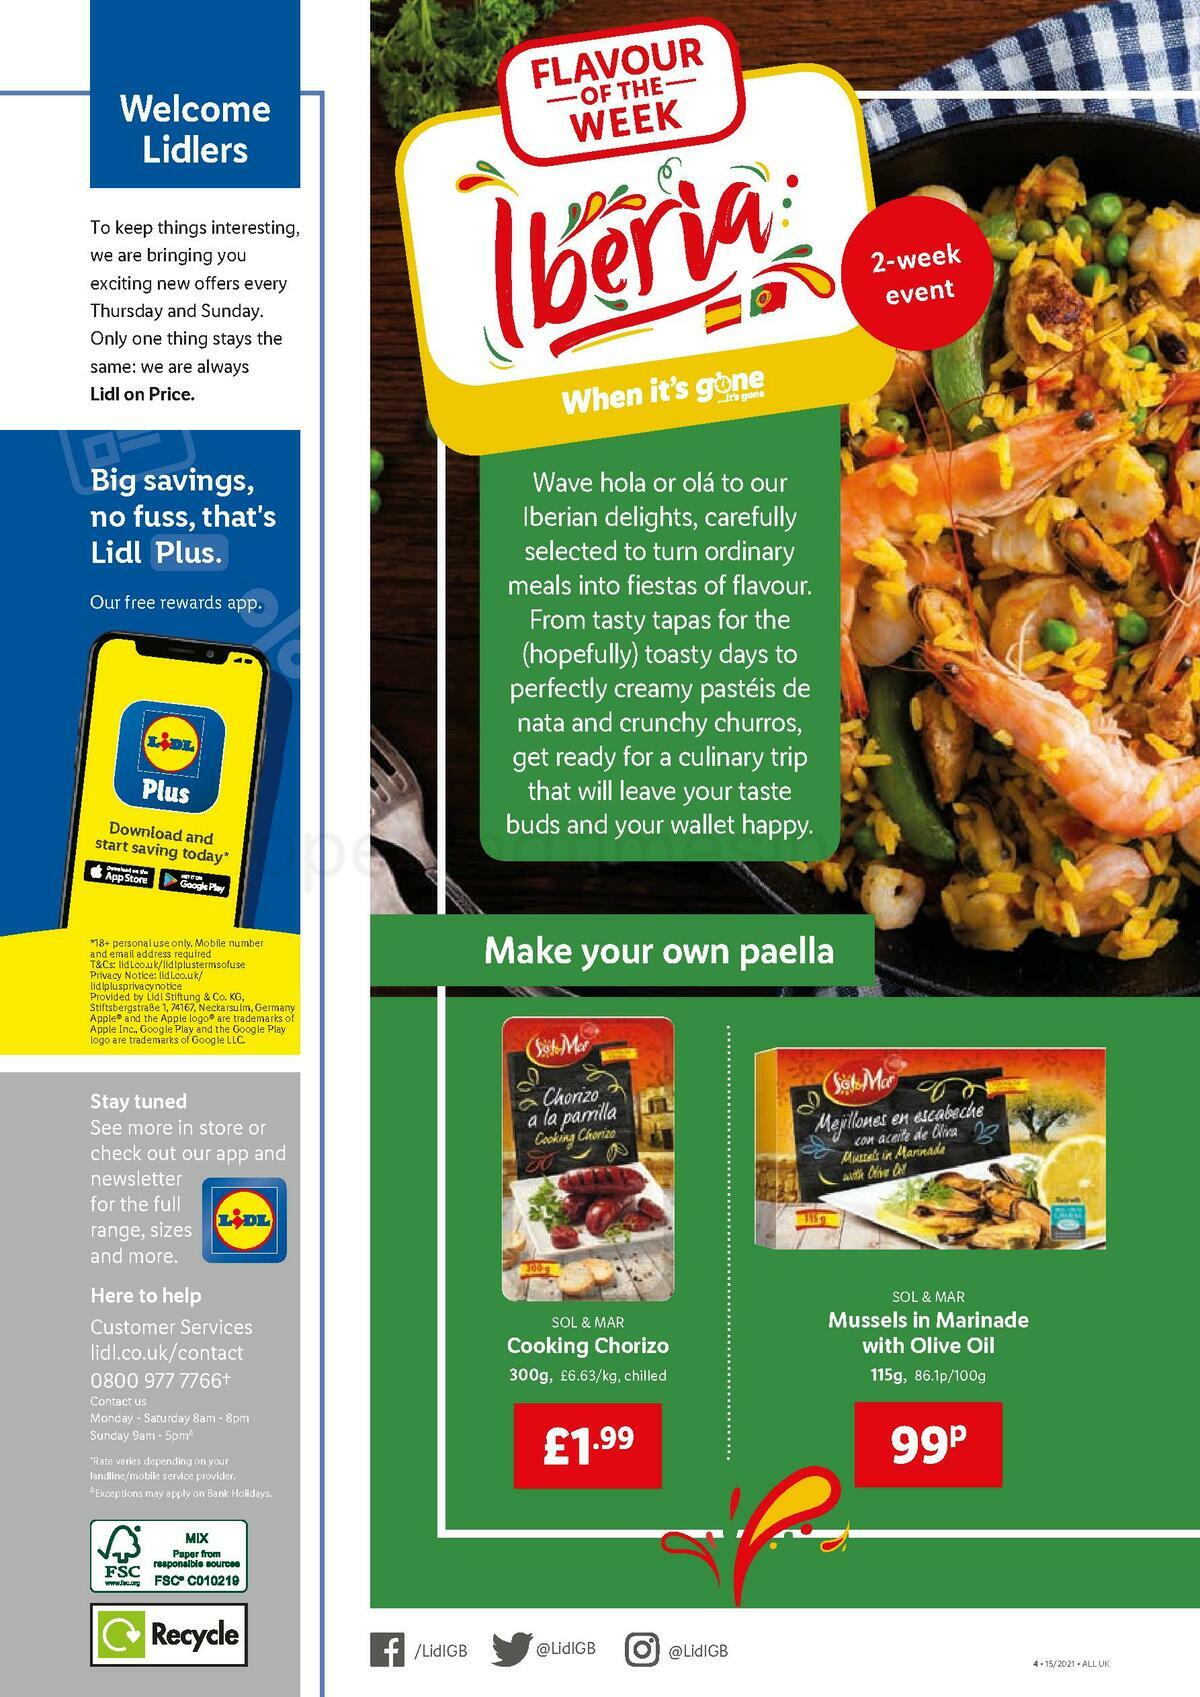 LIDL Offers from 15 April